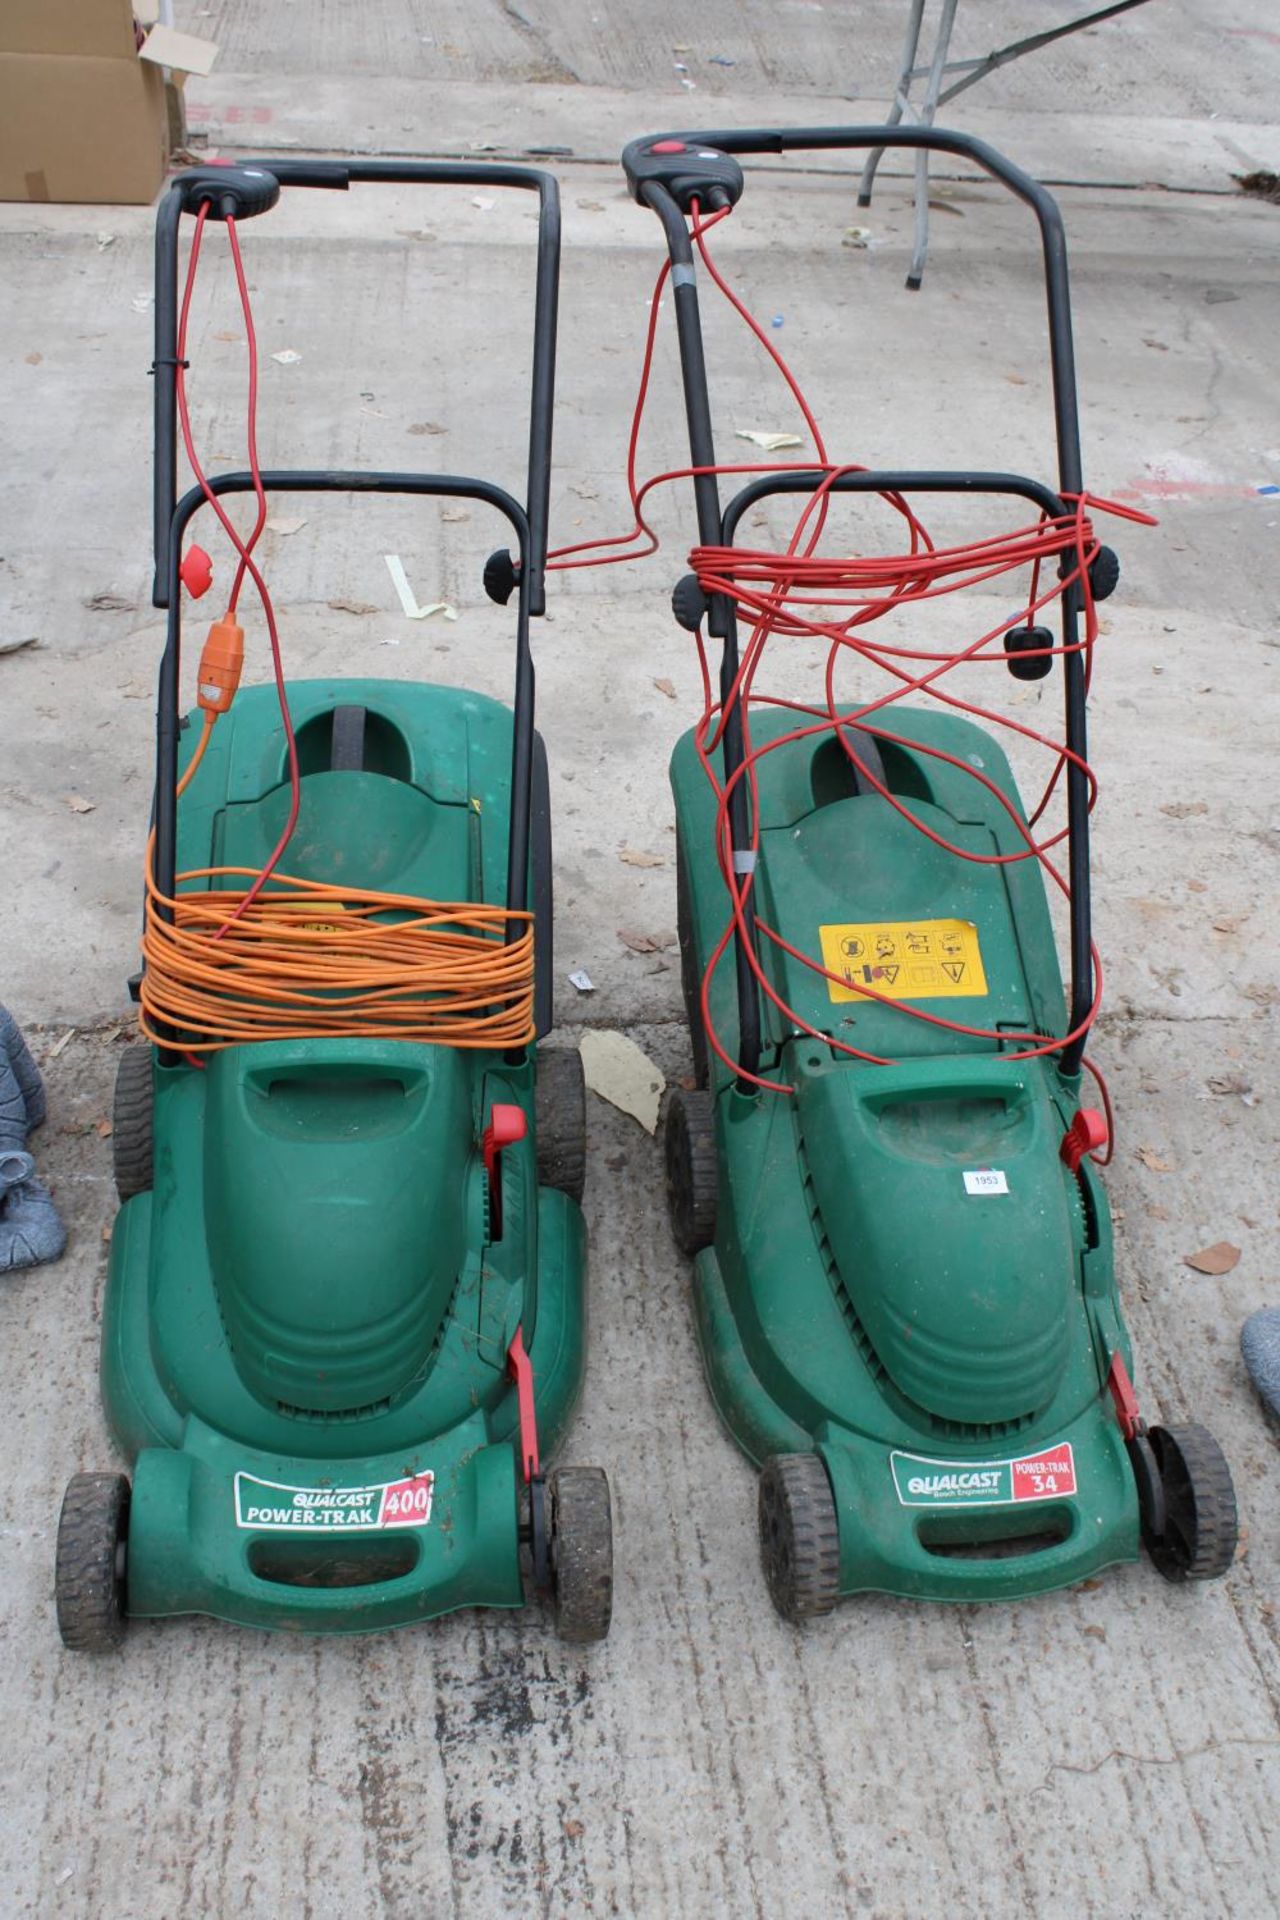 TWO QUALCAST ELECTRIC LAWN MOWERS